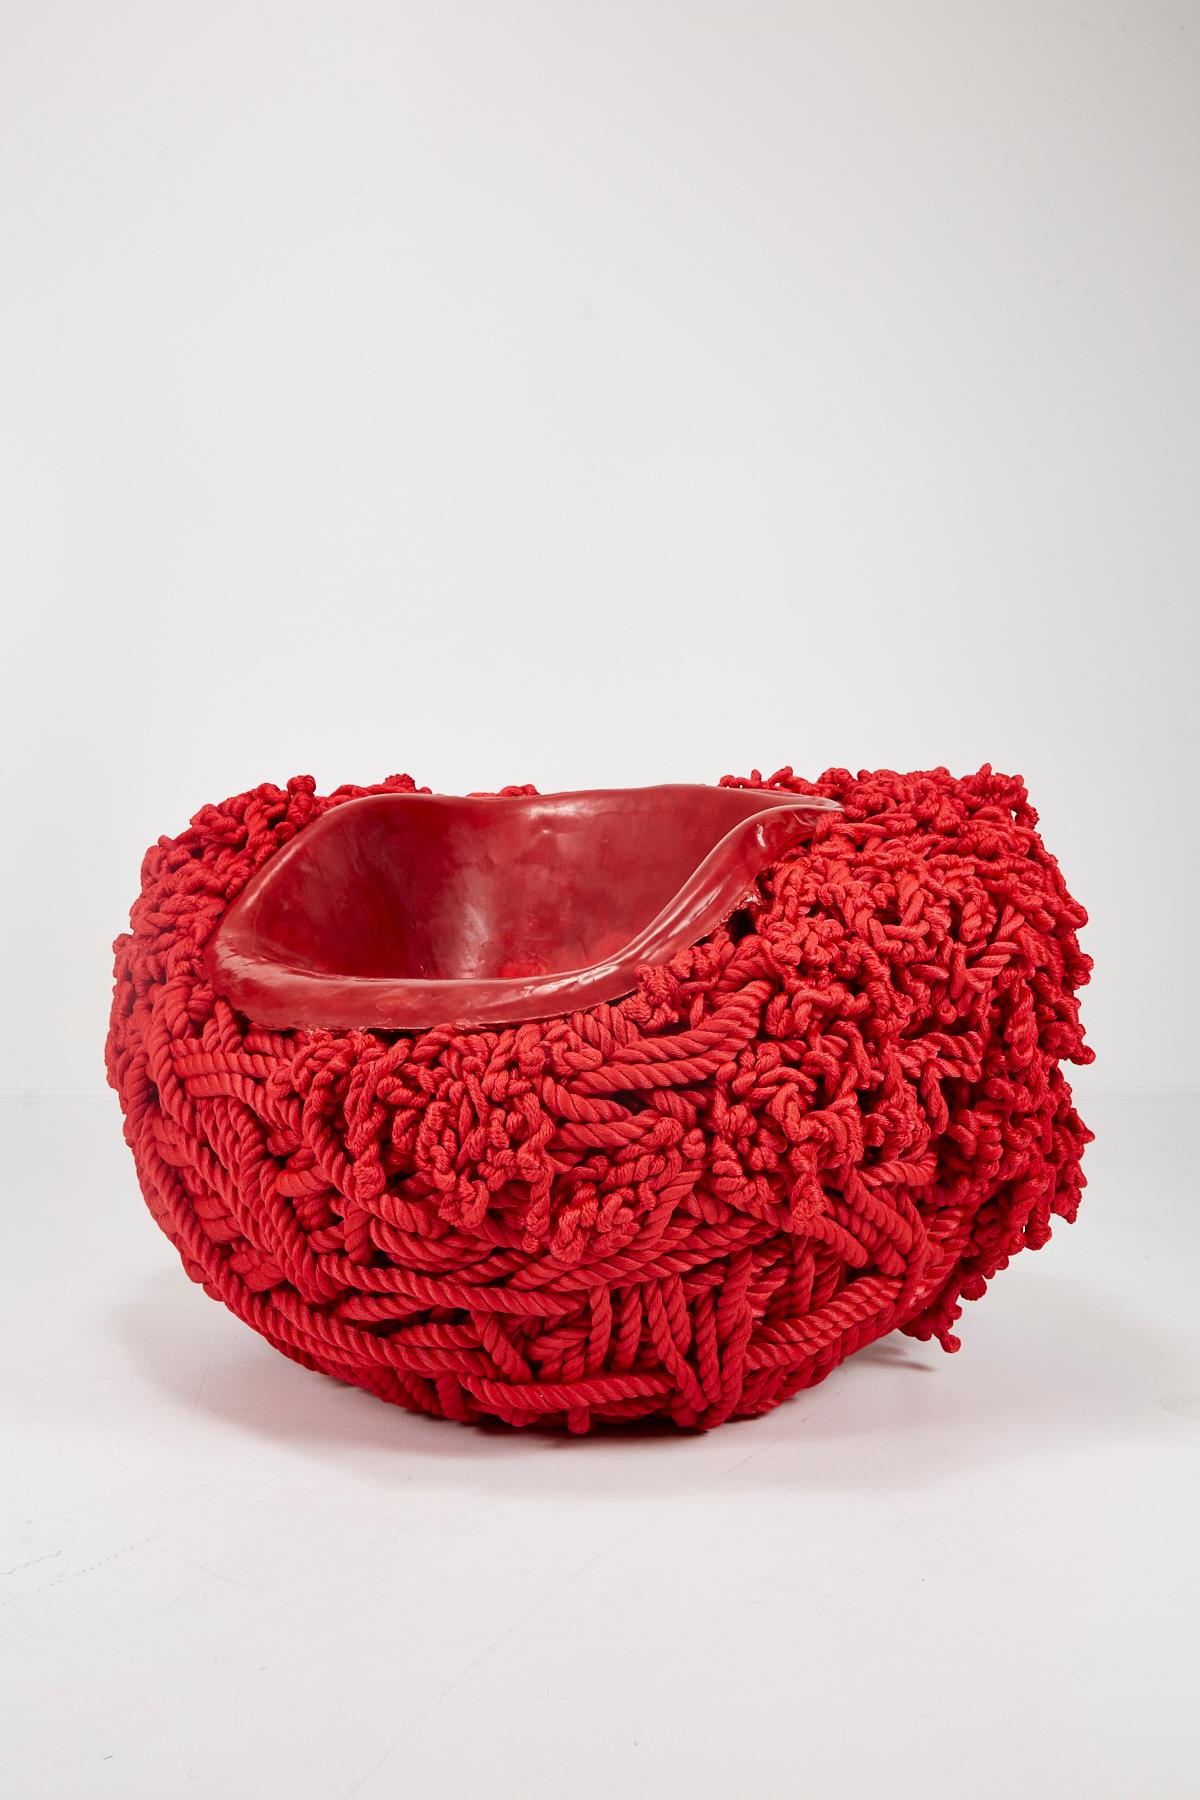 Meltdown Chair Pp Rope Red by Tom Price, 2017 4